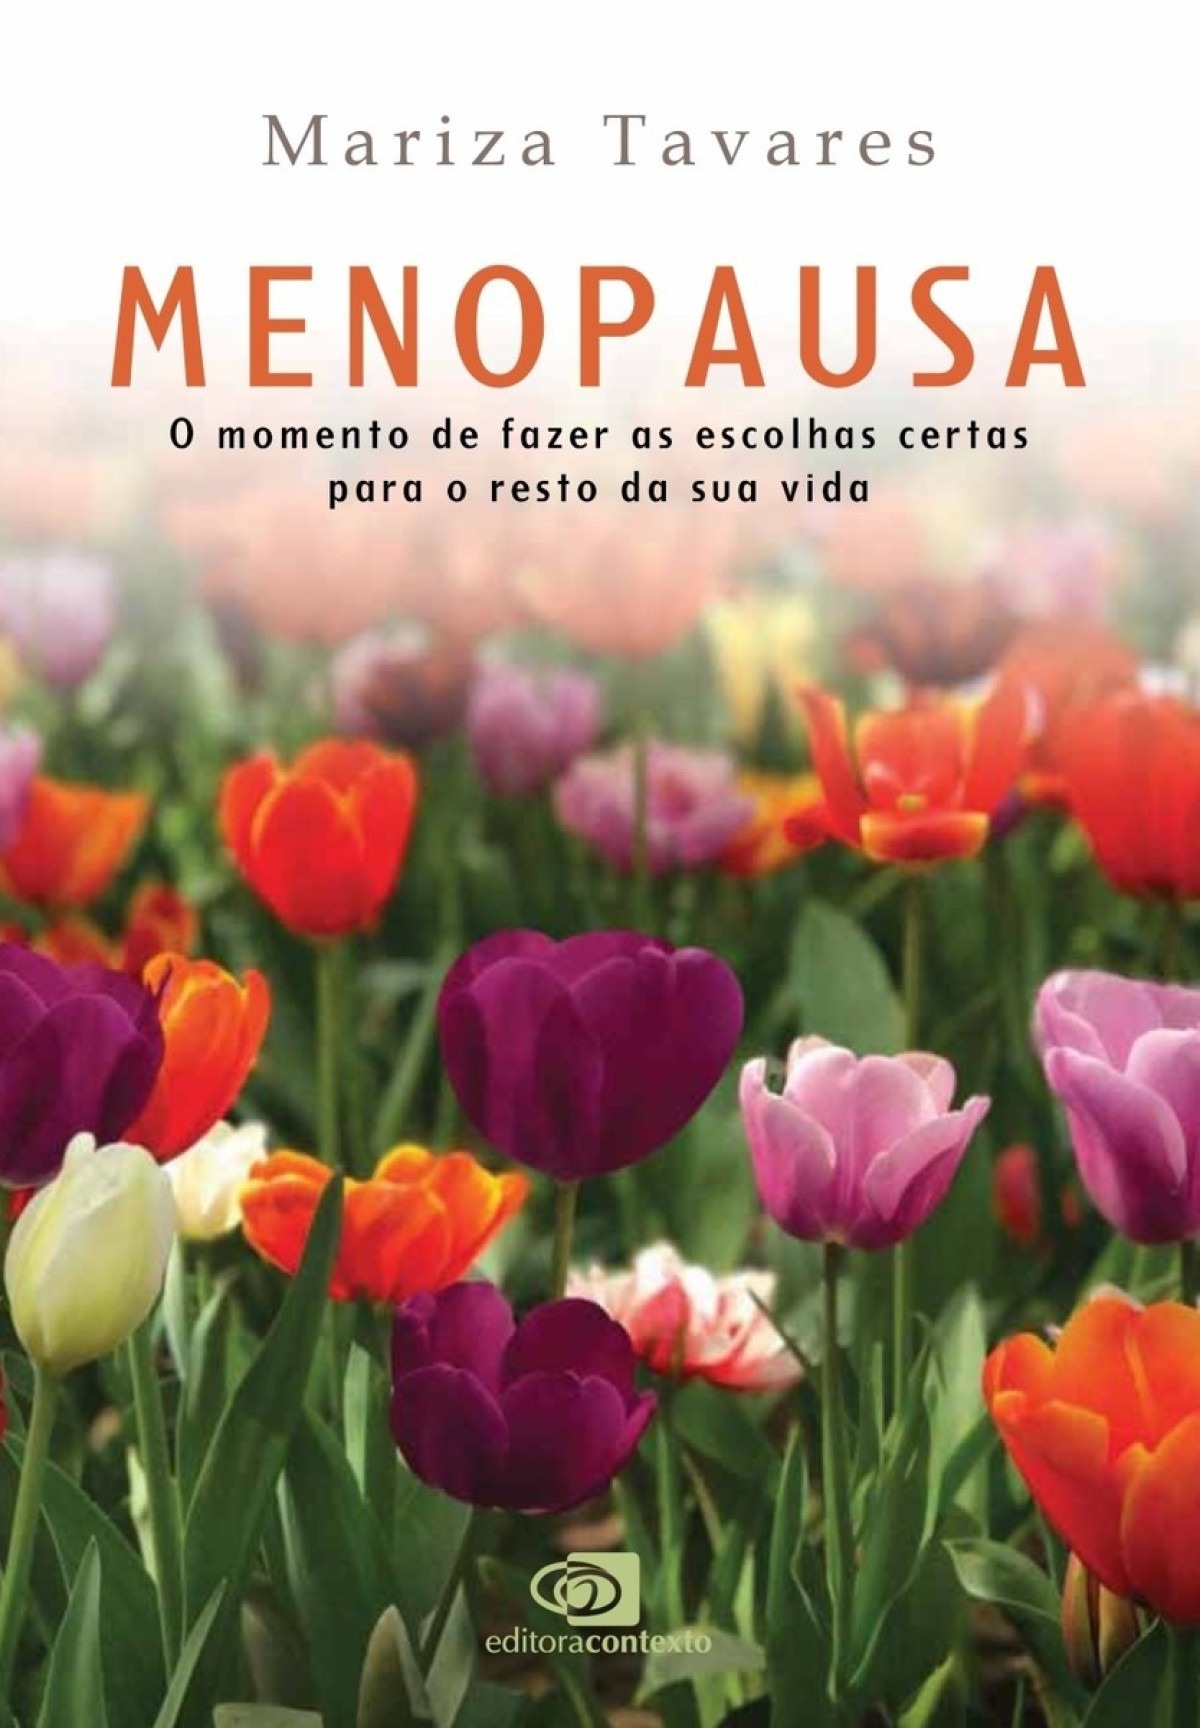  Menopause: When to Make the Right Choices for the Rest of Your Life